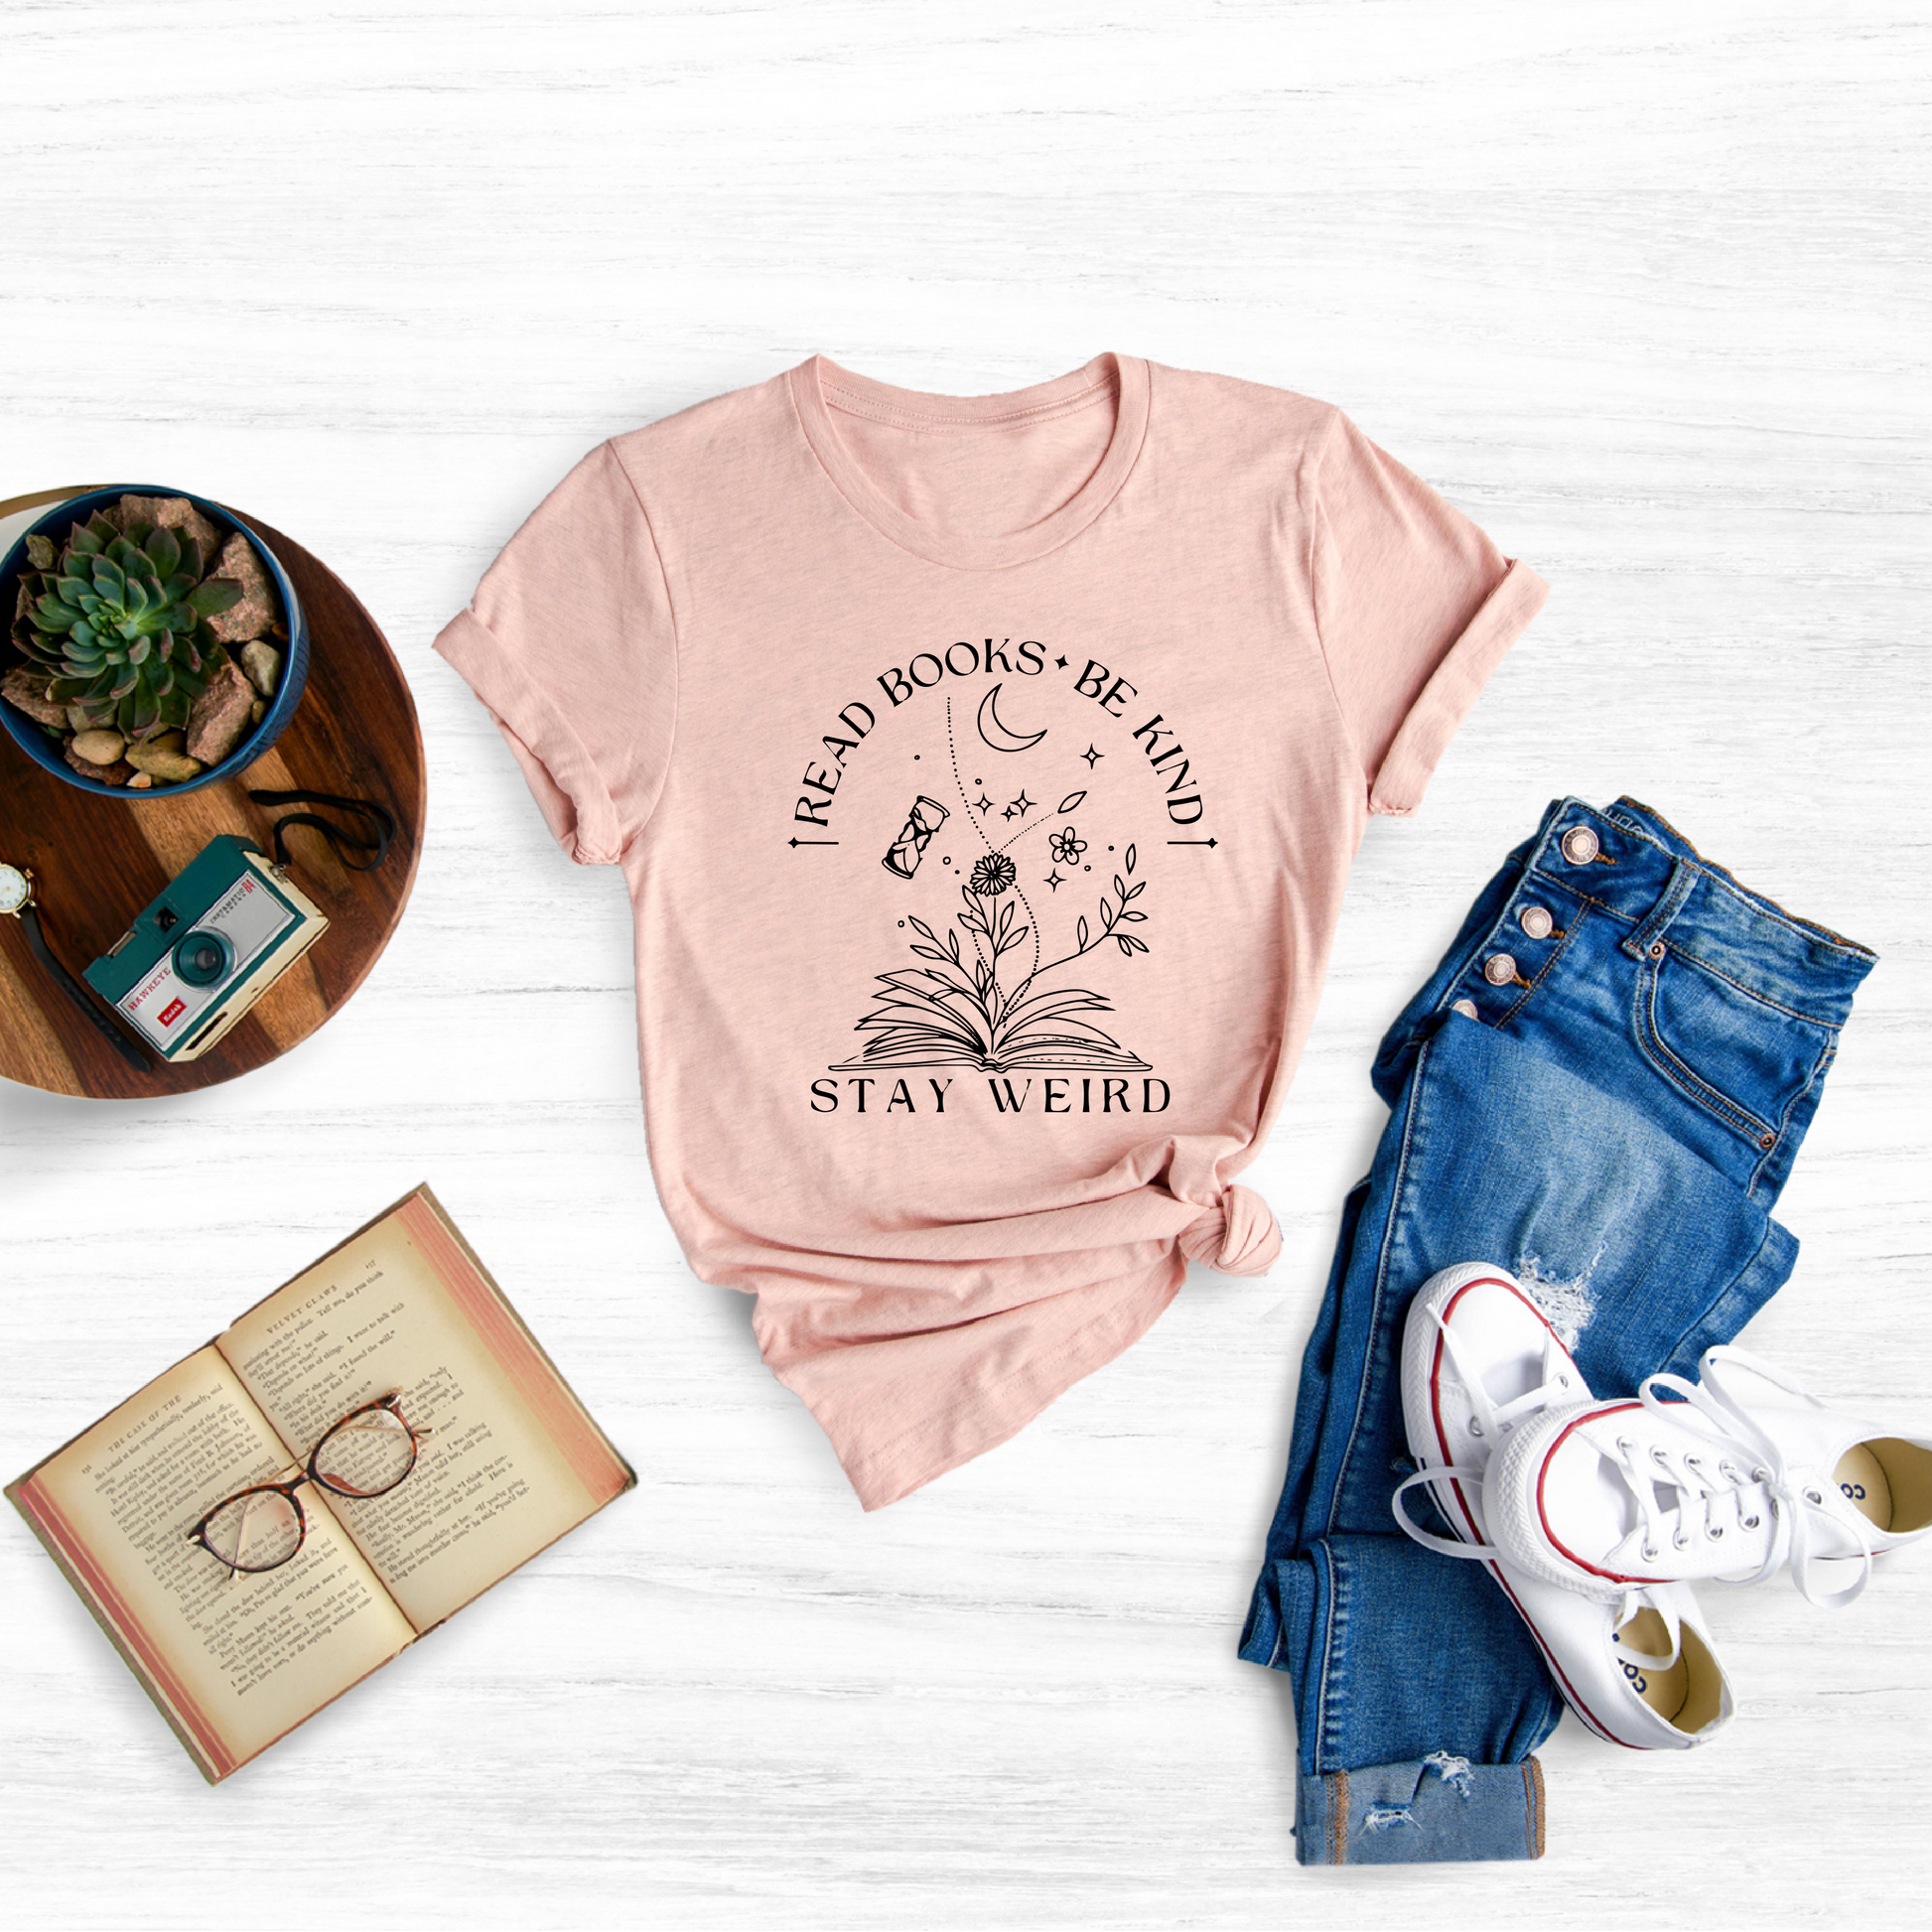 Embrace the power of reading, kindness, and individuality with the inspiring "Read Books Be Kind Stay Weird Shirt, Teacher Shirt"